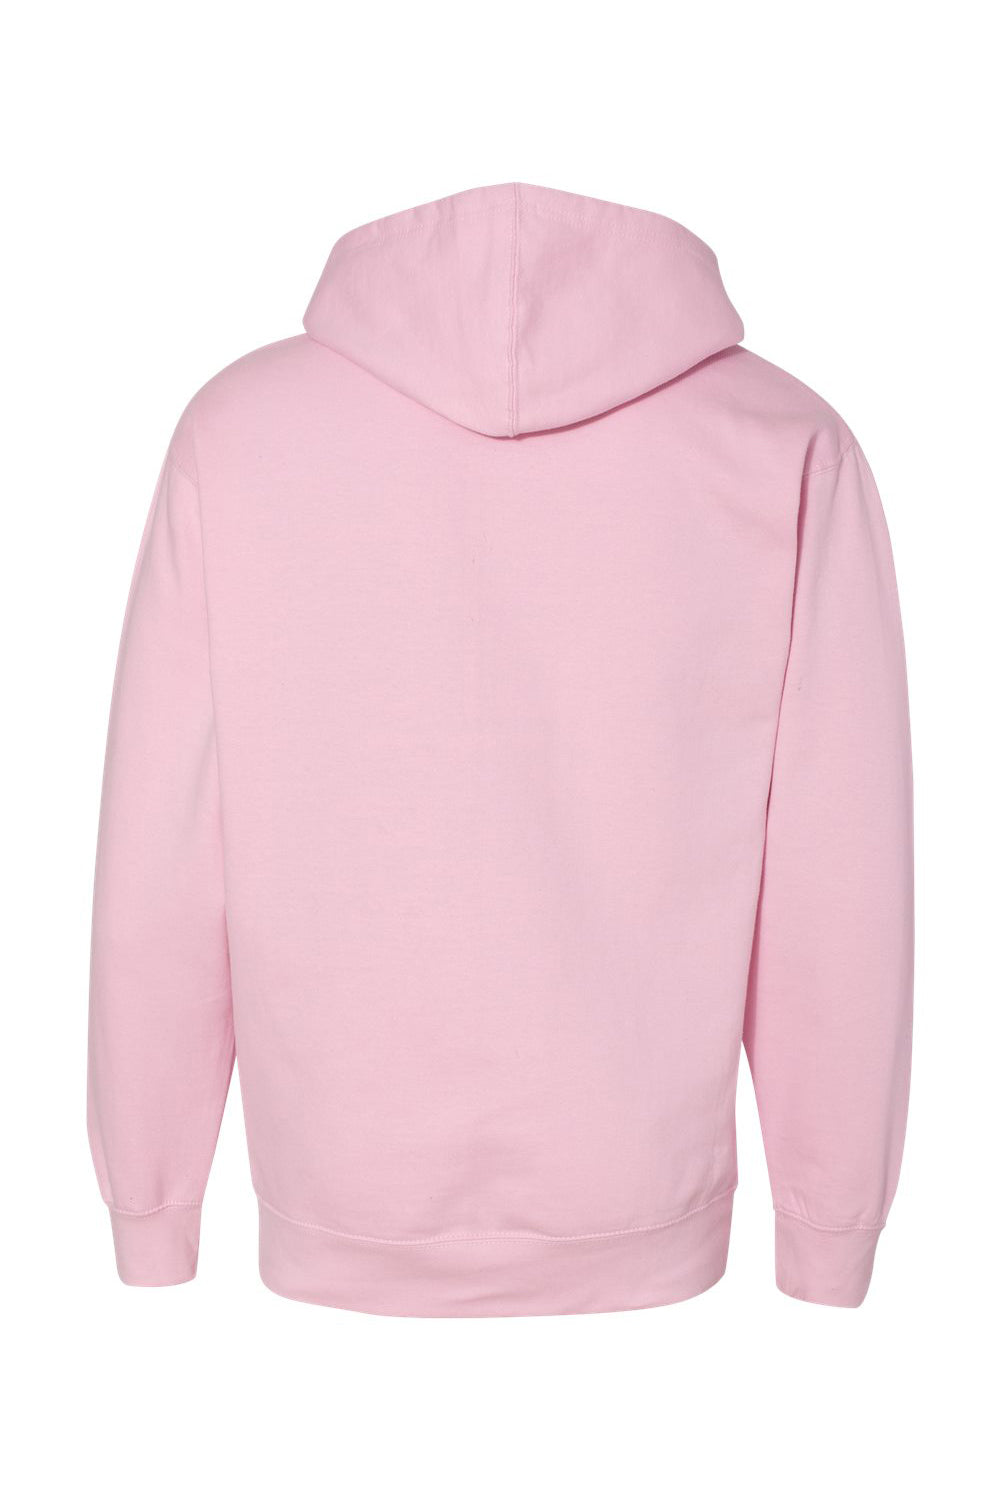 Independent Trading Co. SS4500 Mens Hooded Sweatshirt Hoodie Light Pink Flat Back